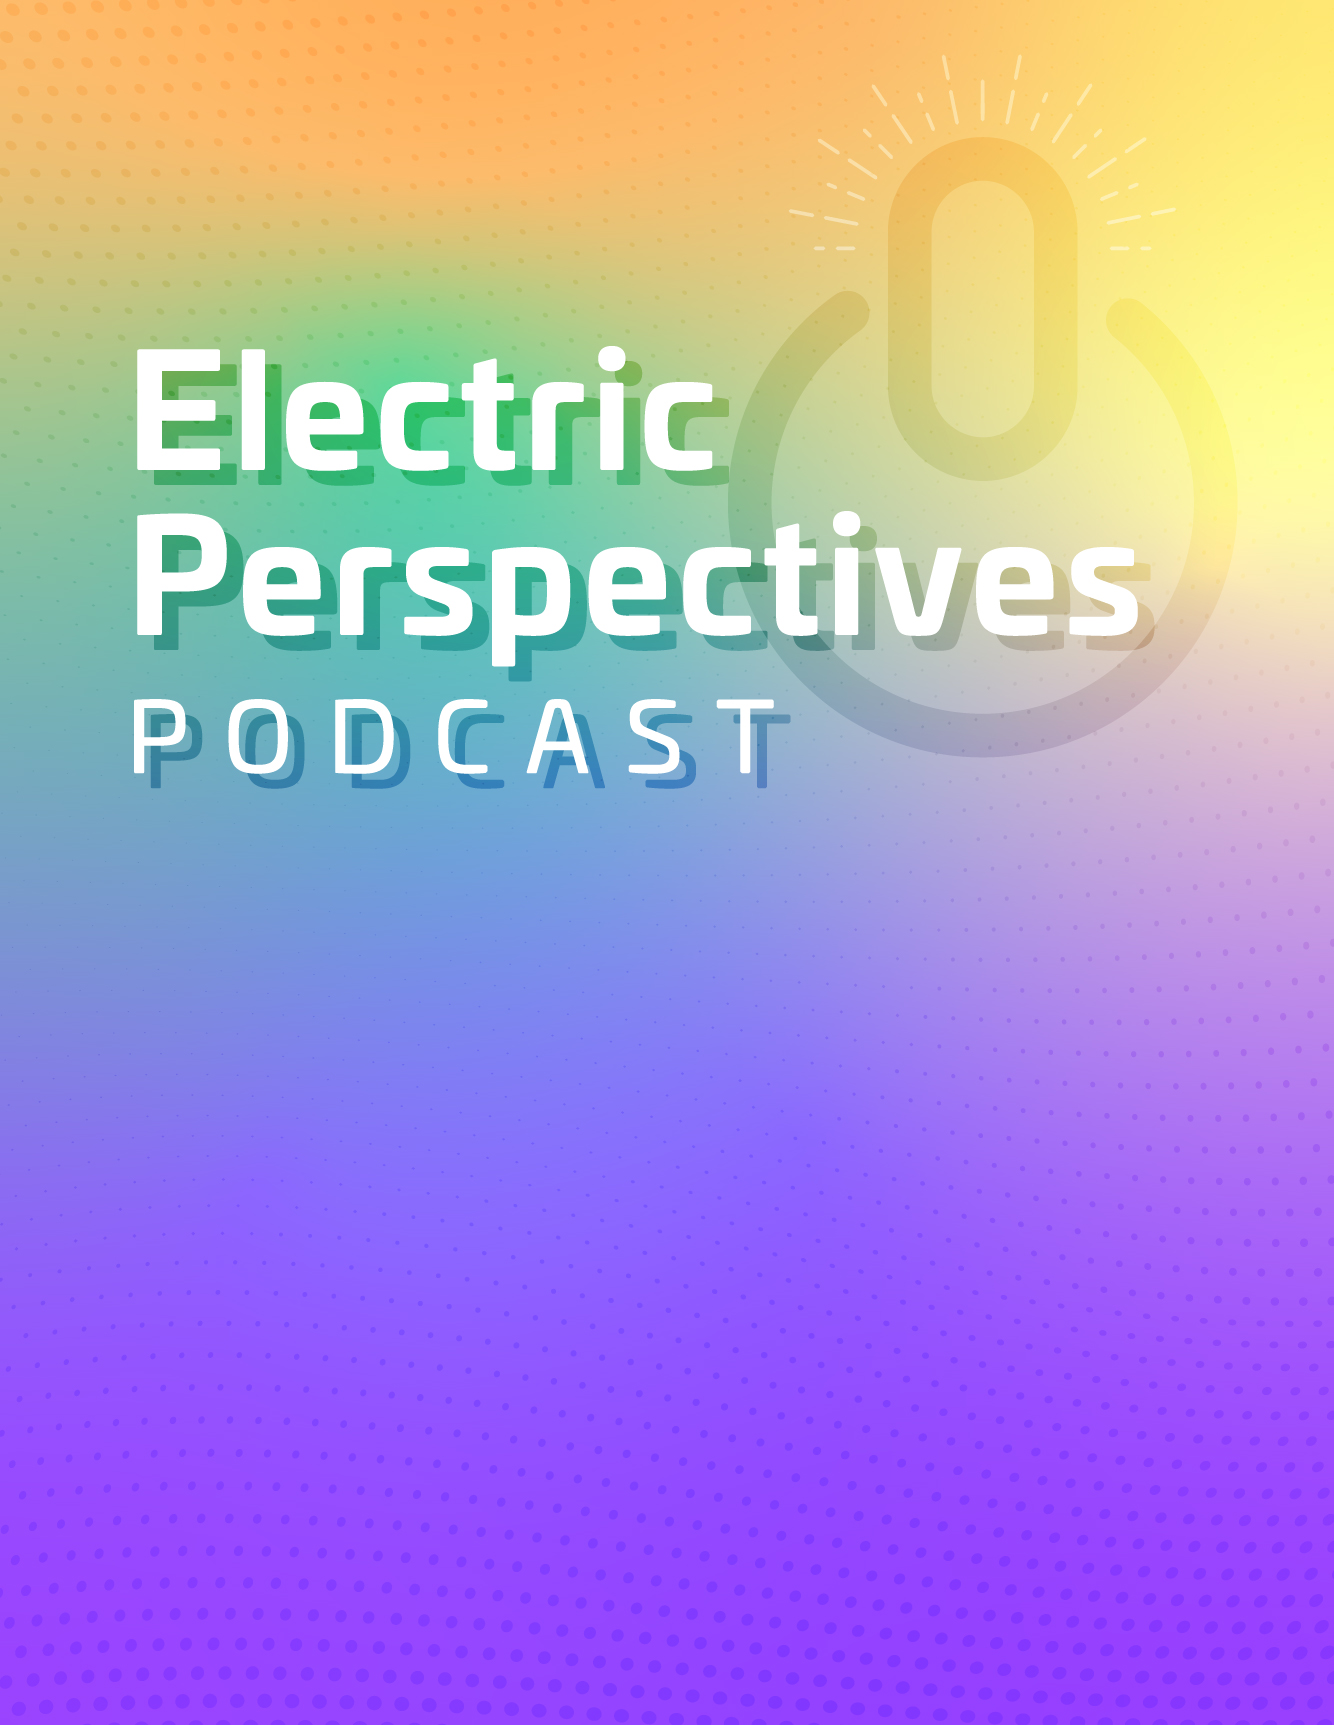 Electric Perspectives Podcast horizontal graphic